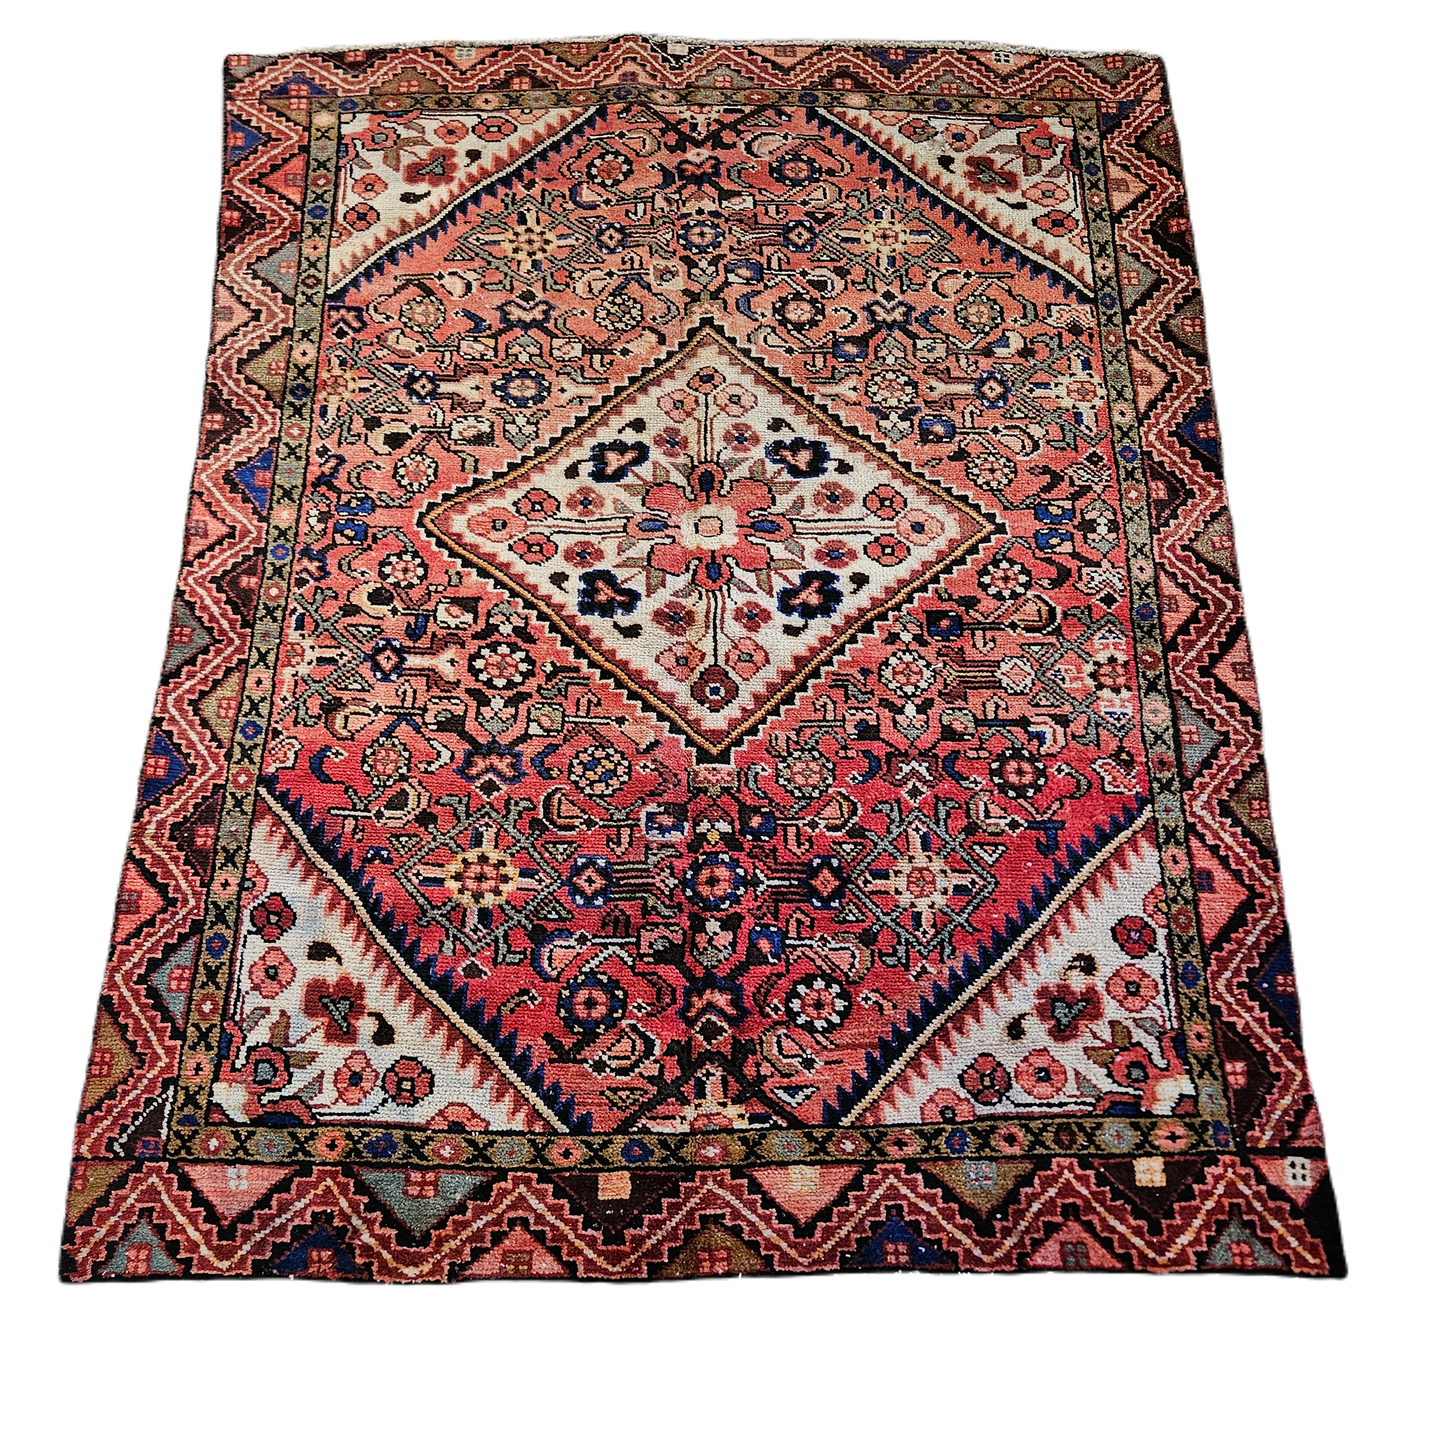 100% Wool Antique Hand Knotted Turkish Brown Rug ~ 4' 8" x 6' 3"